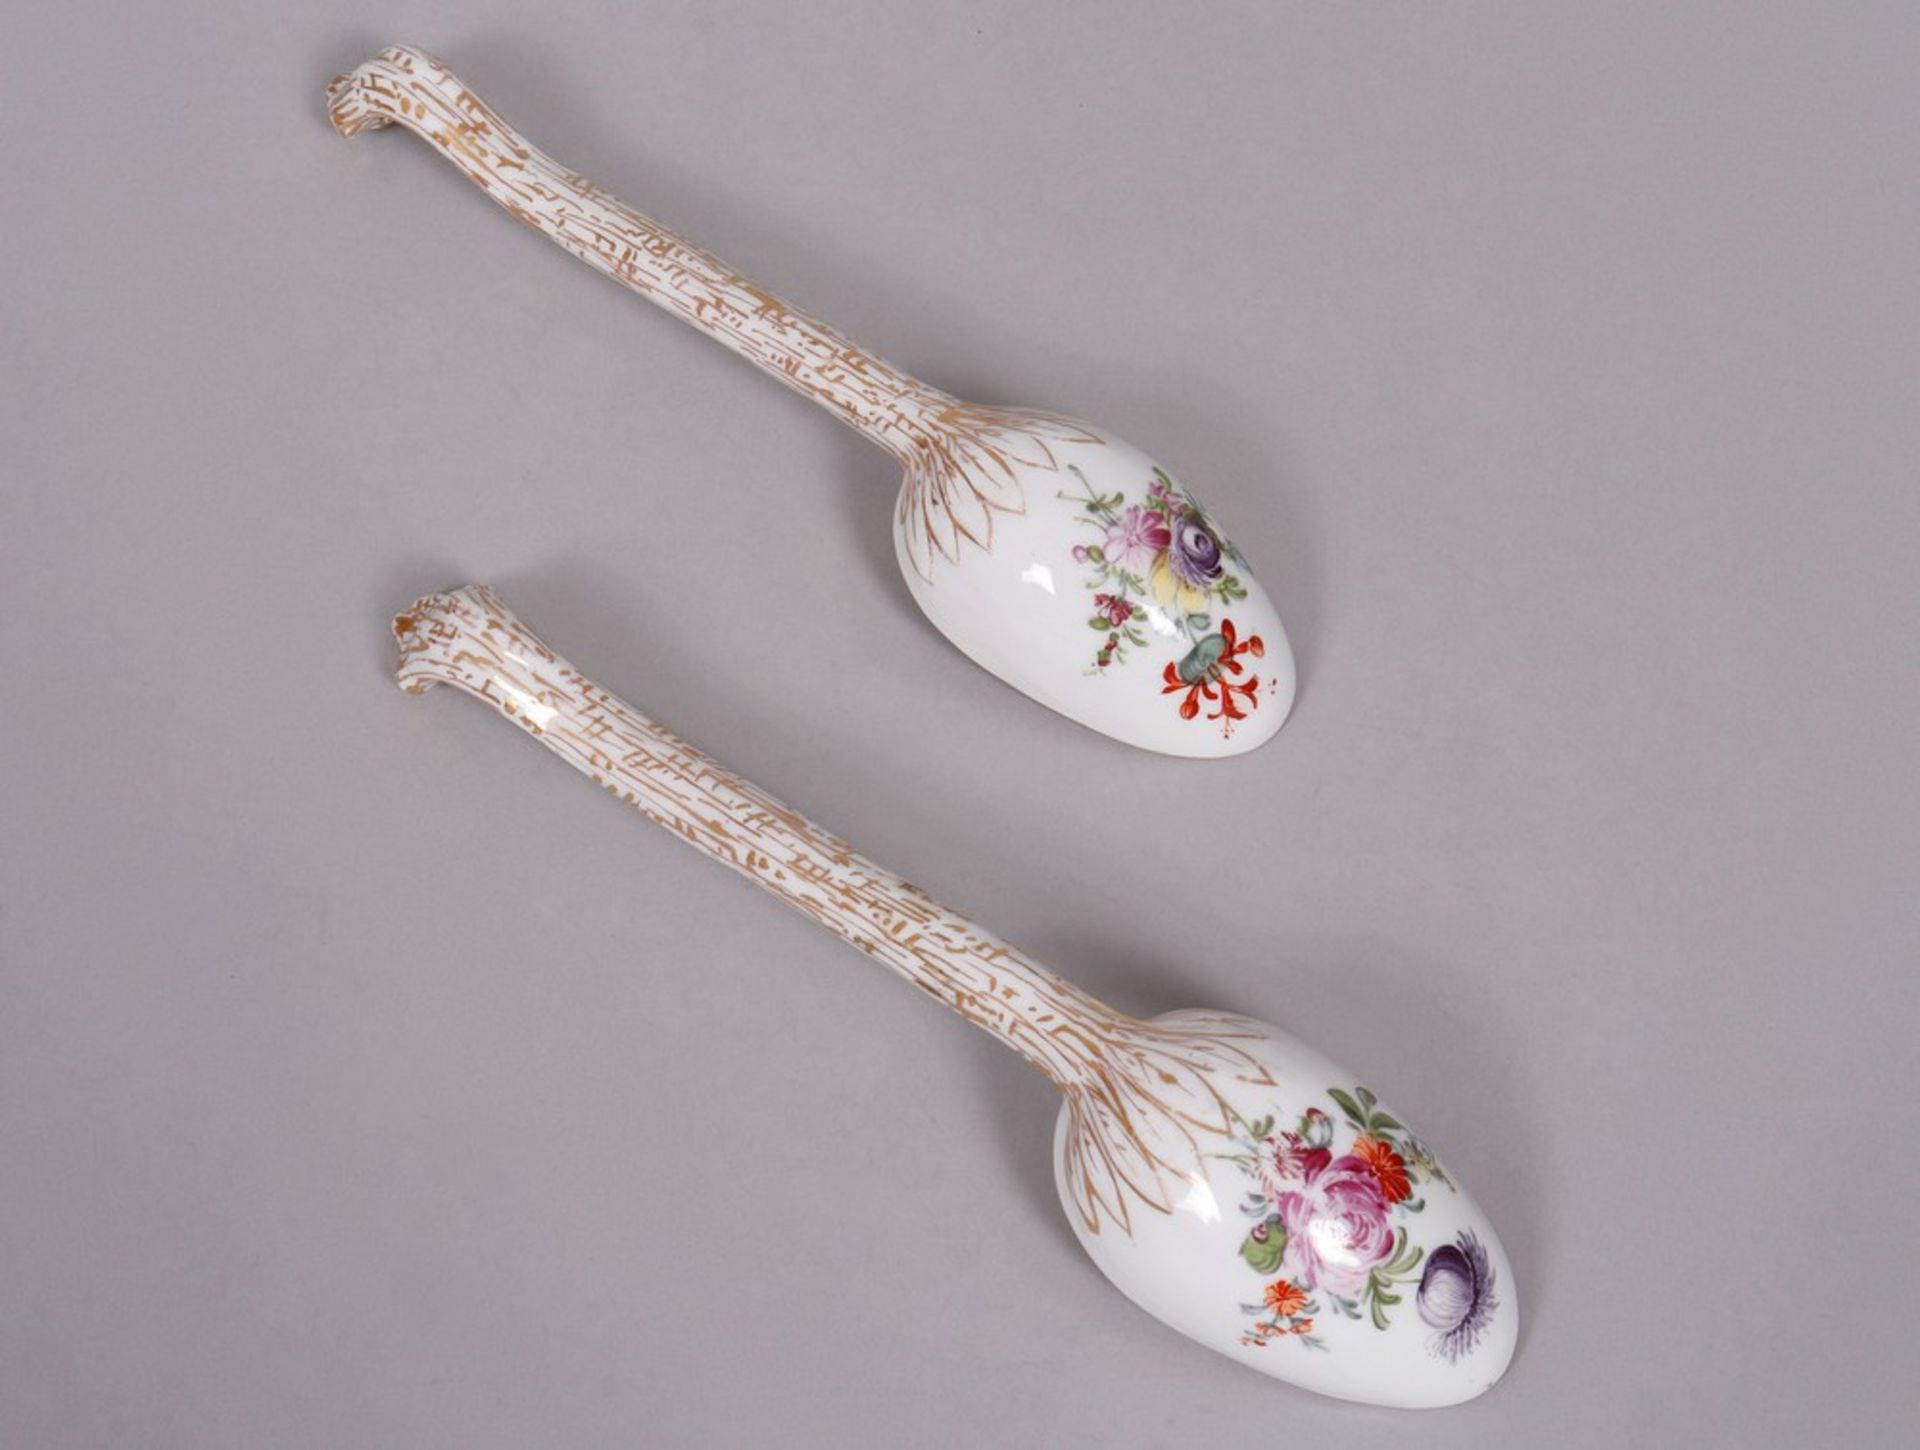 2 spoons, floral decoration, probably Meissen, 19th C. - Image 3 of 4